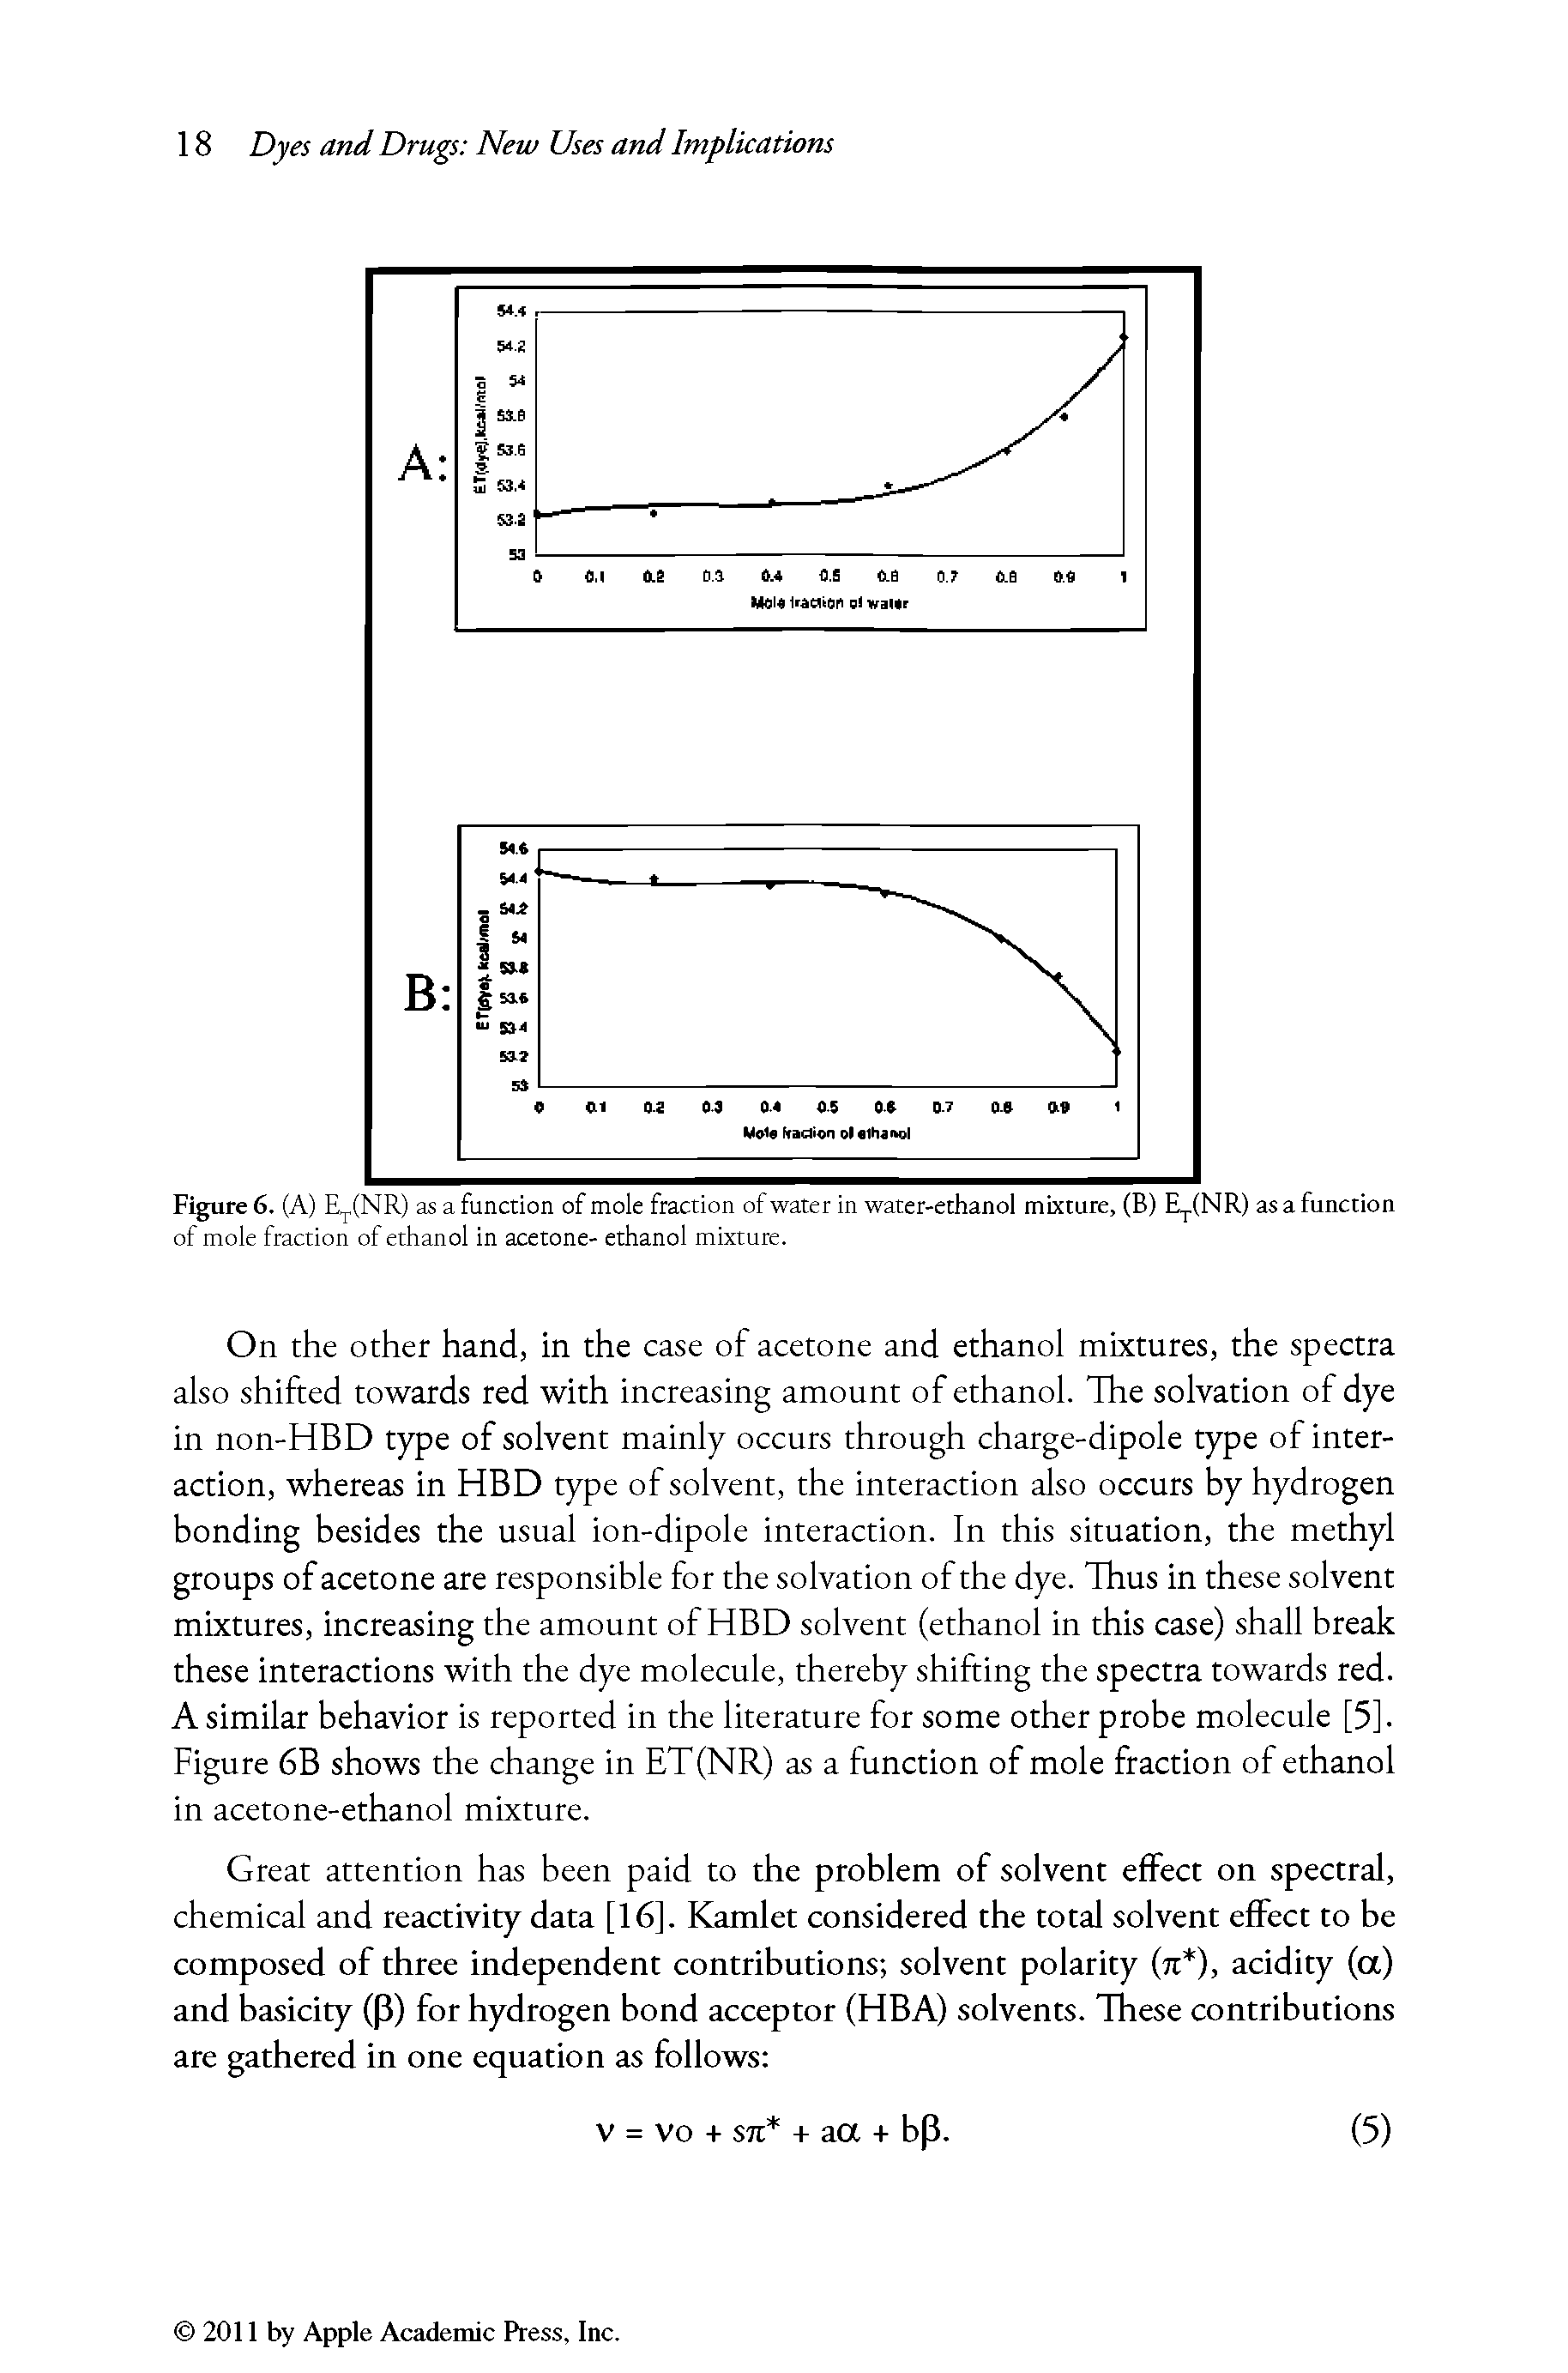 Figure 6. (A) E (NR) as a function of mole fraction of water in water-ethanol mixture, (B) Ej.(NR) as a function of mole fraction of ethanol in acetone- ethanol mixture.